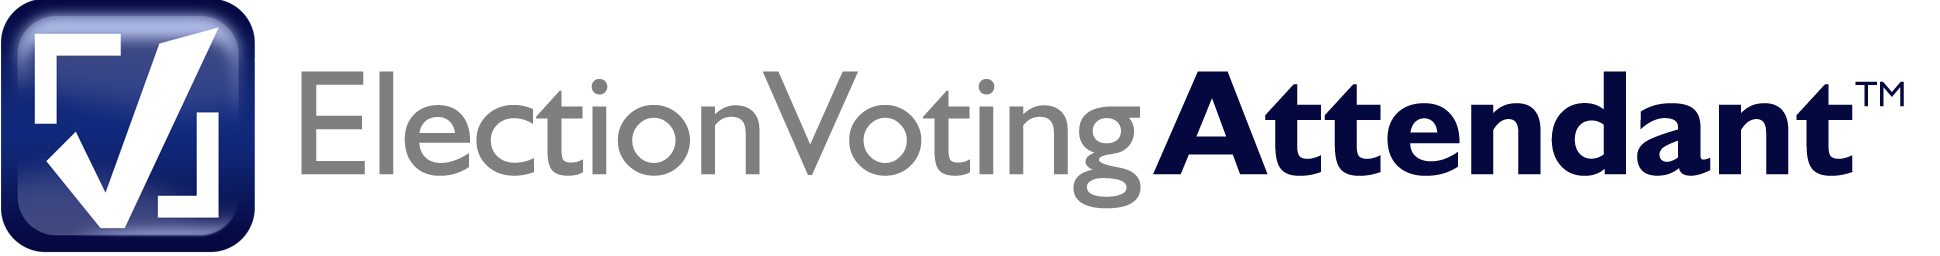 Election Voting